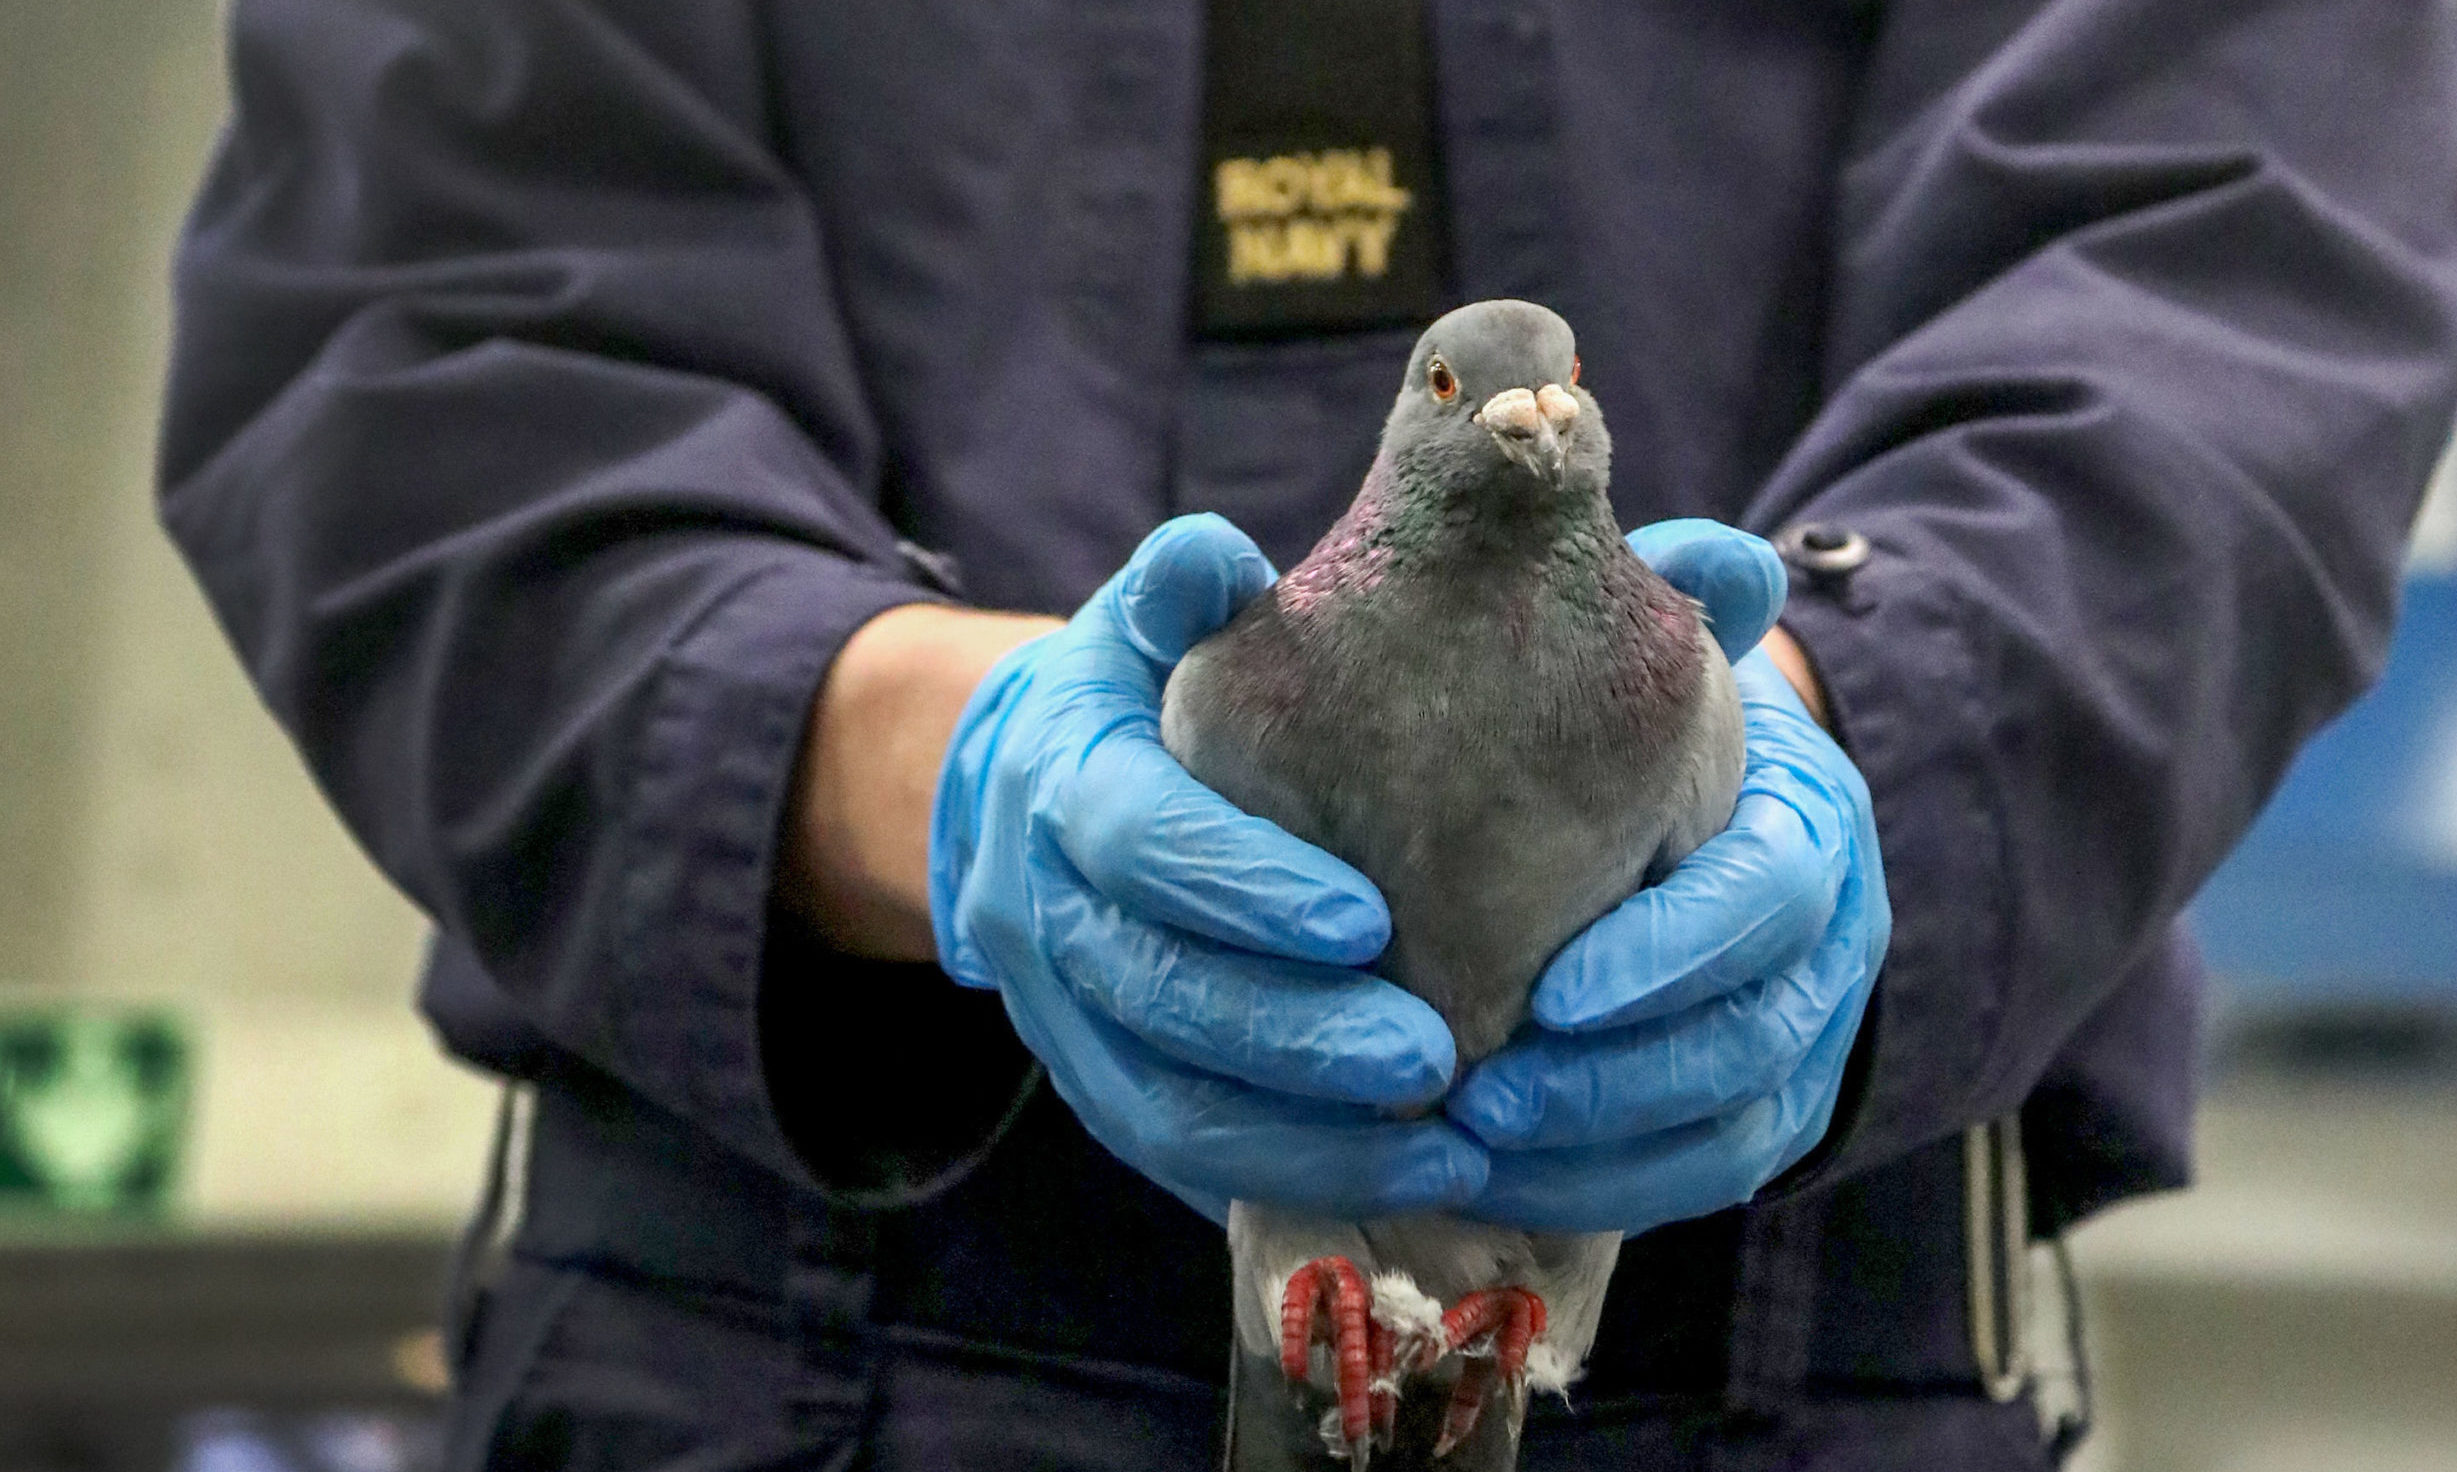 The pigeon, confused and exhausted, landed on the flight deck of the HMS Queen Elizabeth.